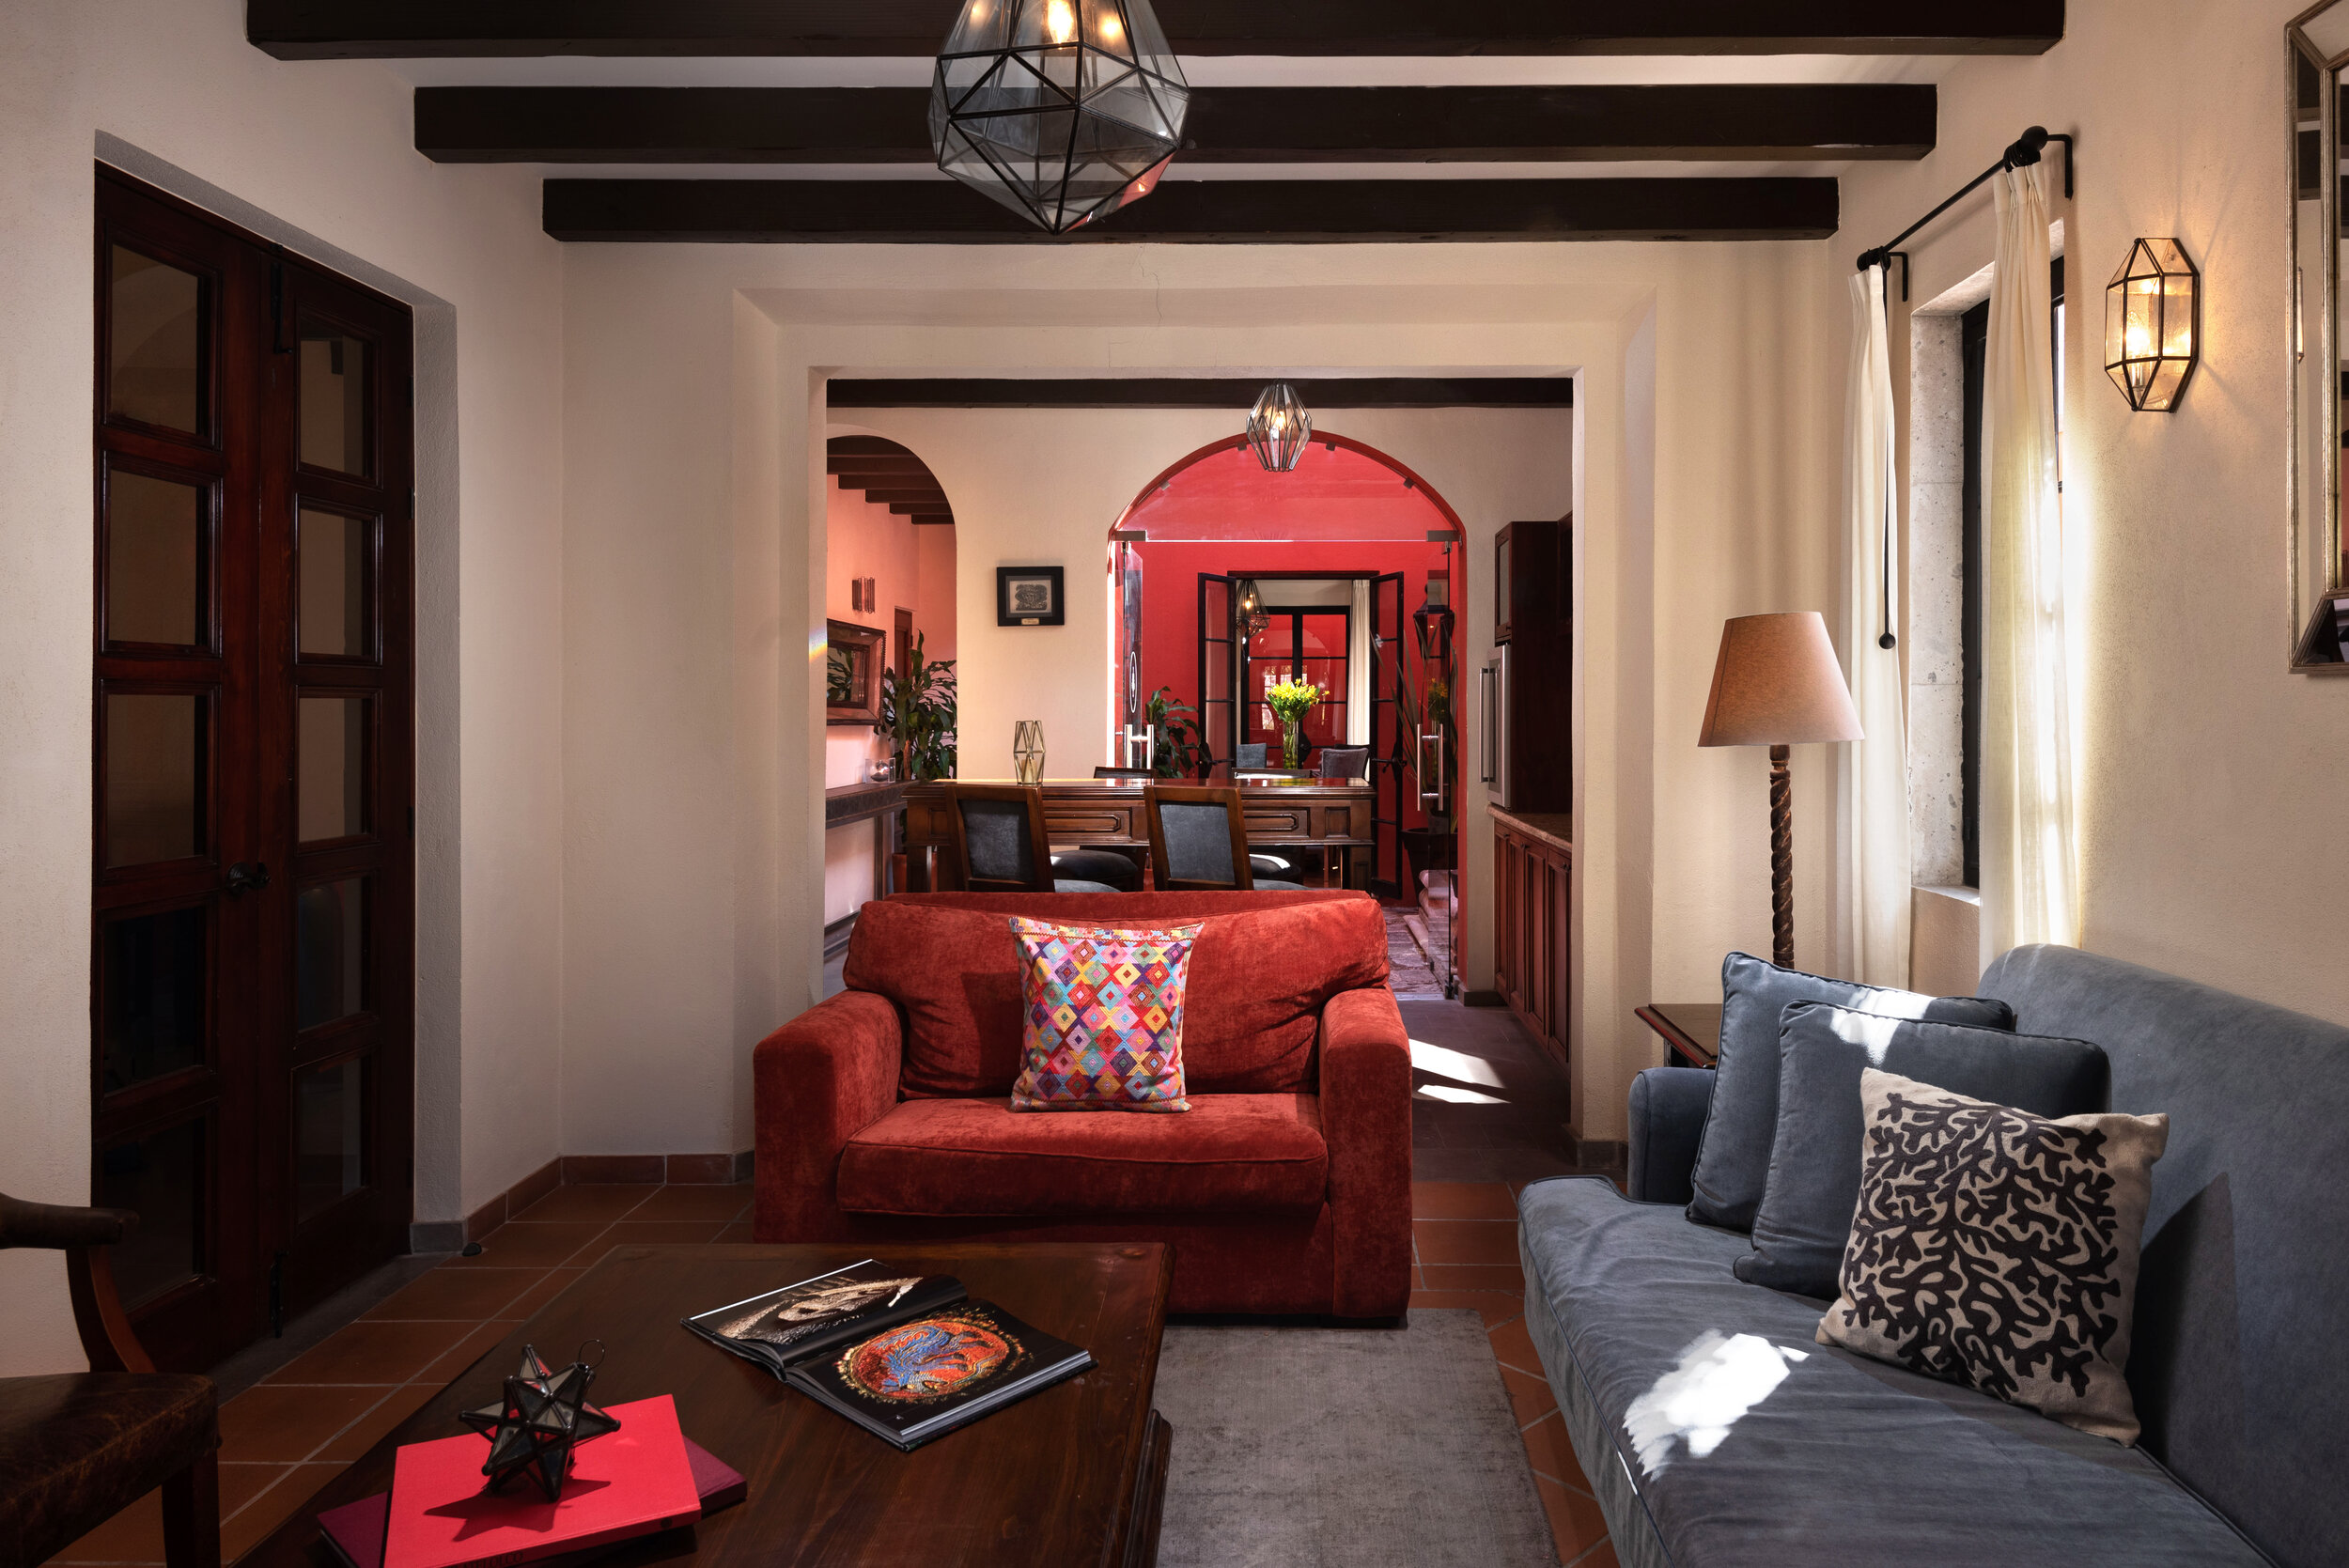   2-bedroom residence living room (photo credit: Rosewood Hotels)  